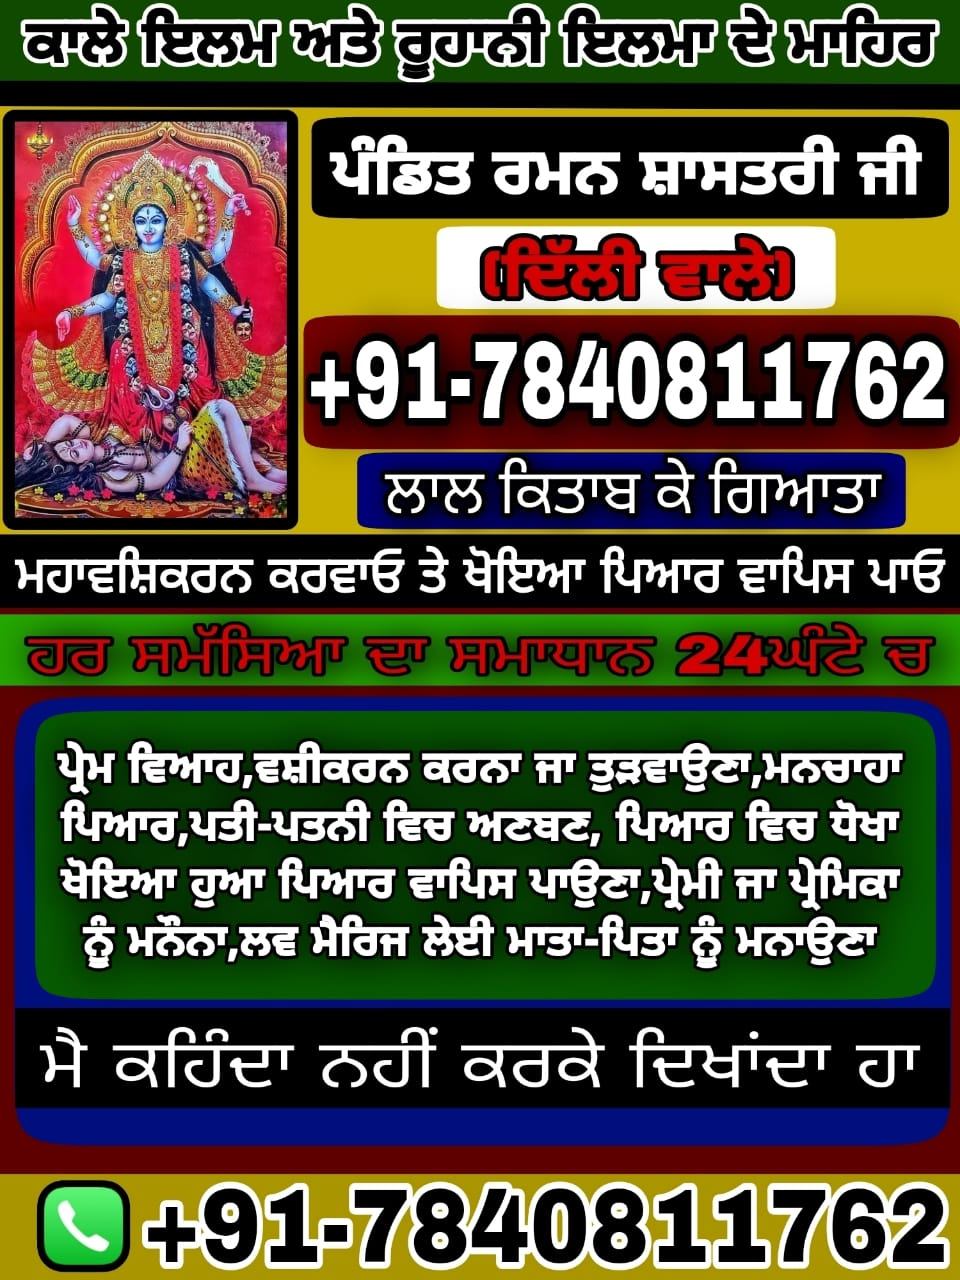 NO.1 ASTROLOGER INDIAN.ALL PROBLEMS SOLUTION WITHIN ONLY 24 HOURS